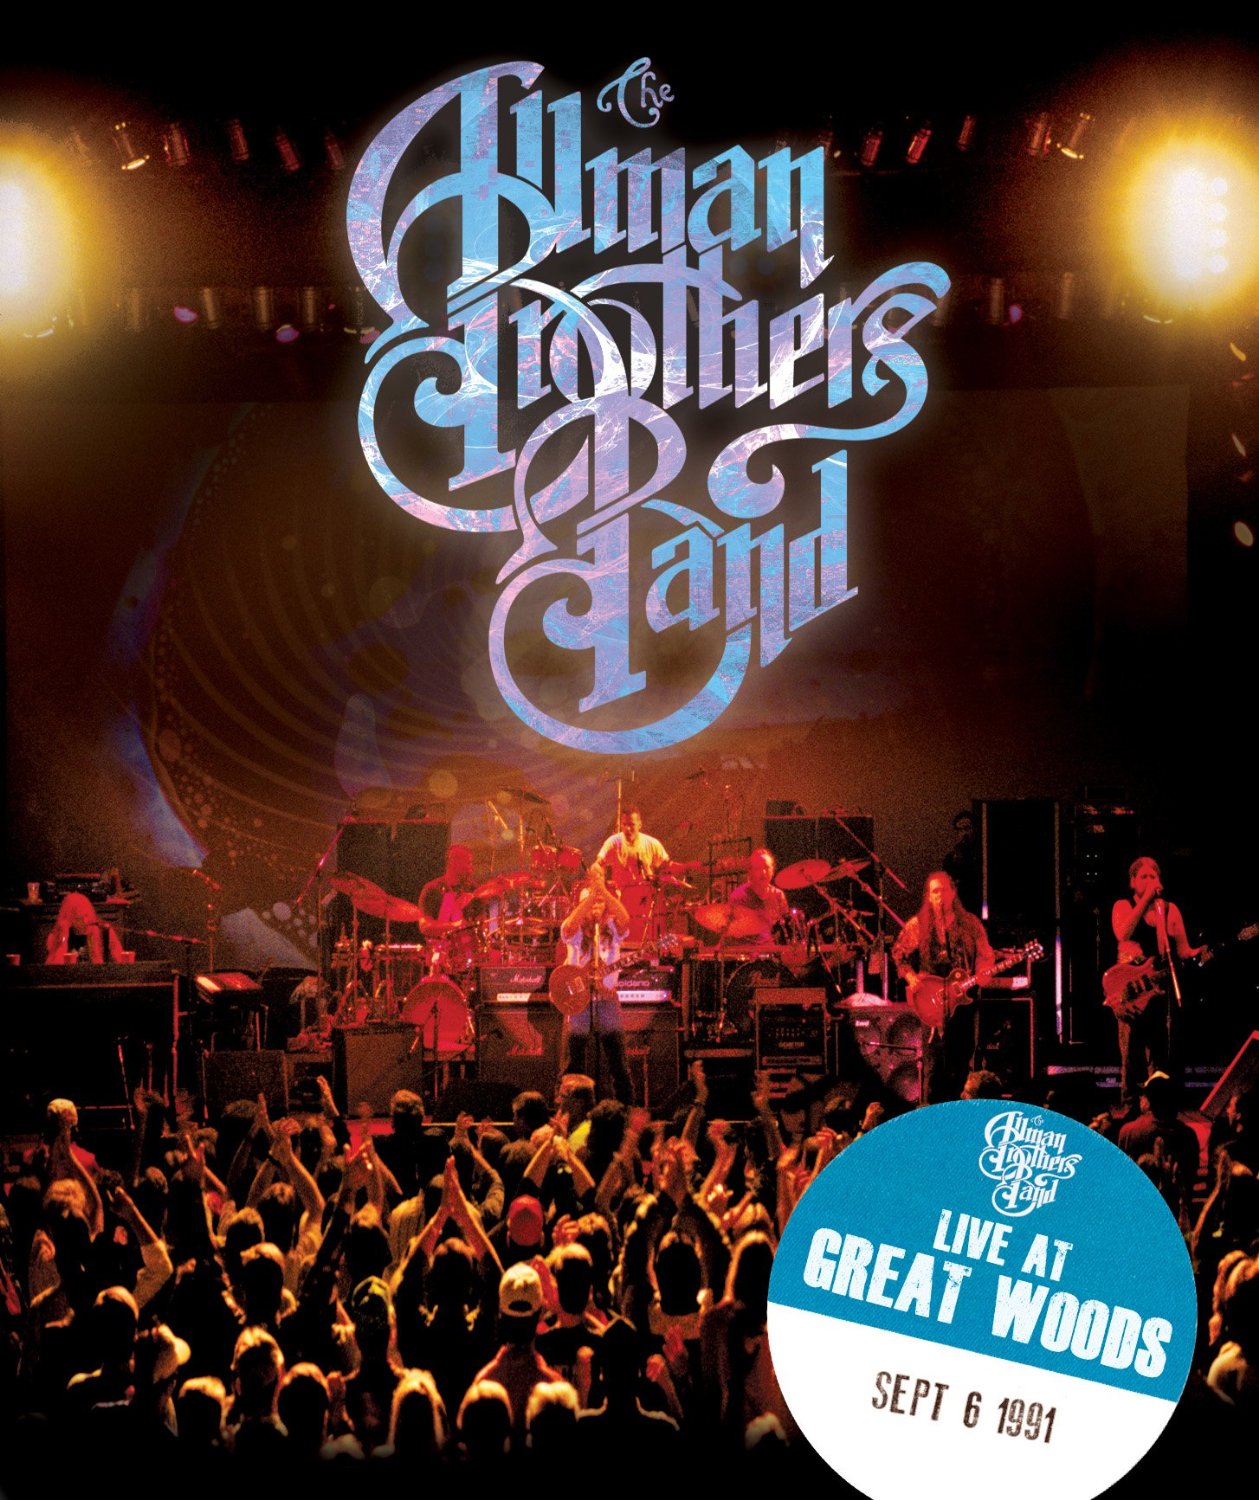 The Allman Brothers Band: Play All Night, Live at Great Woods, Boston Commons